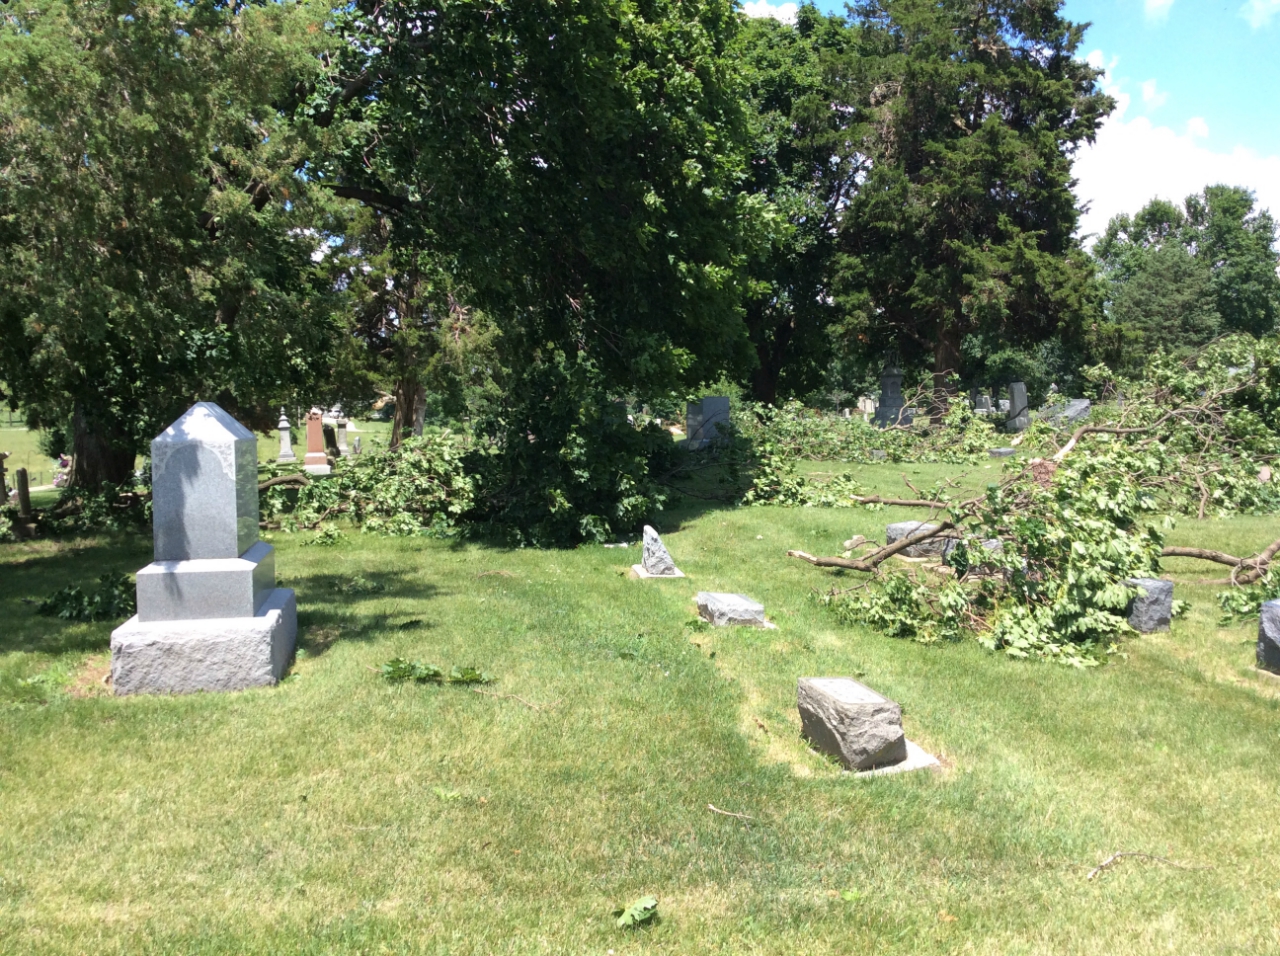 Trees down in cemetary just south of Troy Grove